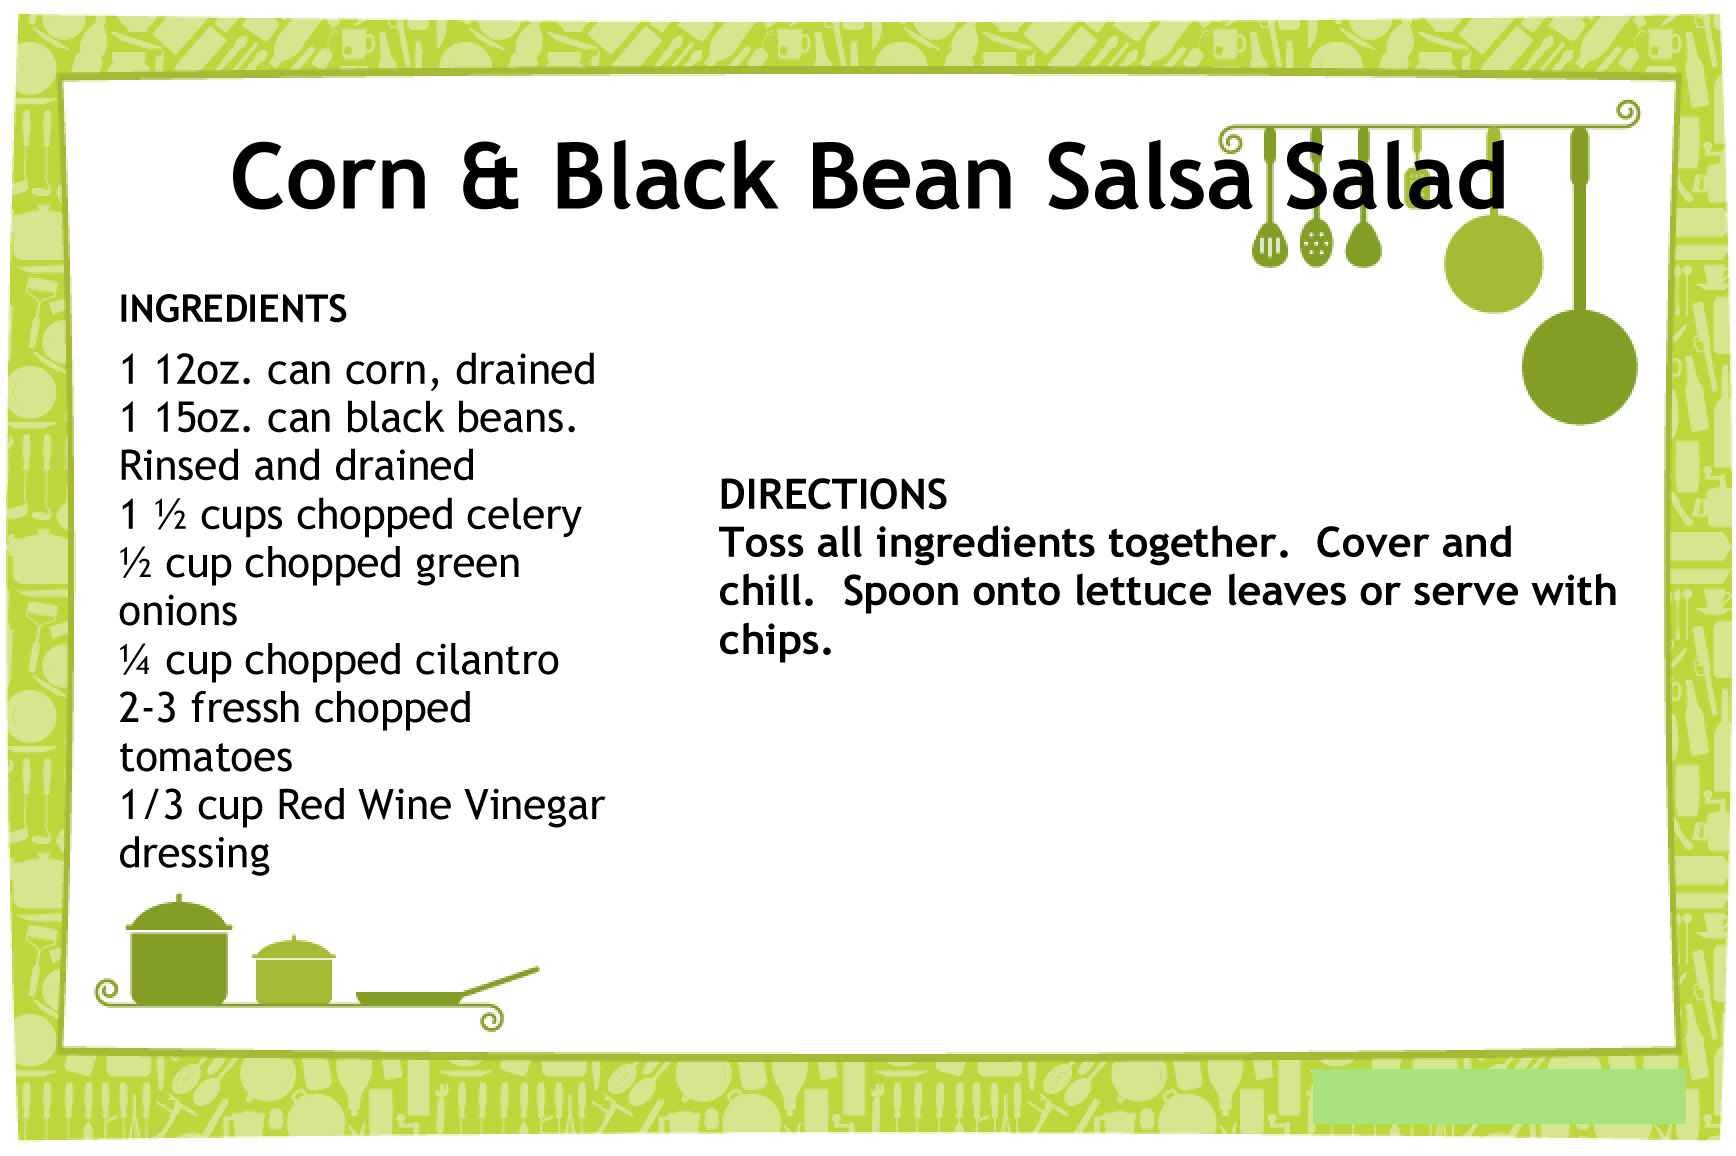 Gallery For Gt Recipe Template For Microsoft Word Mesa 39 S In Free Recipe Card Templates For Microsoft Word